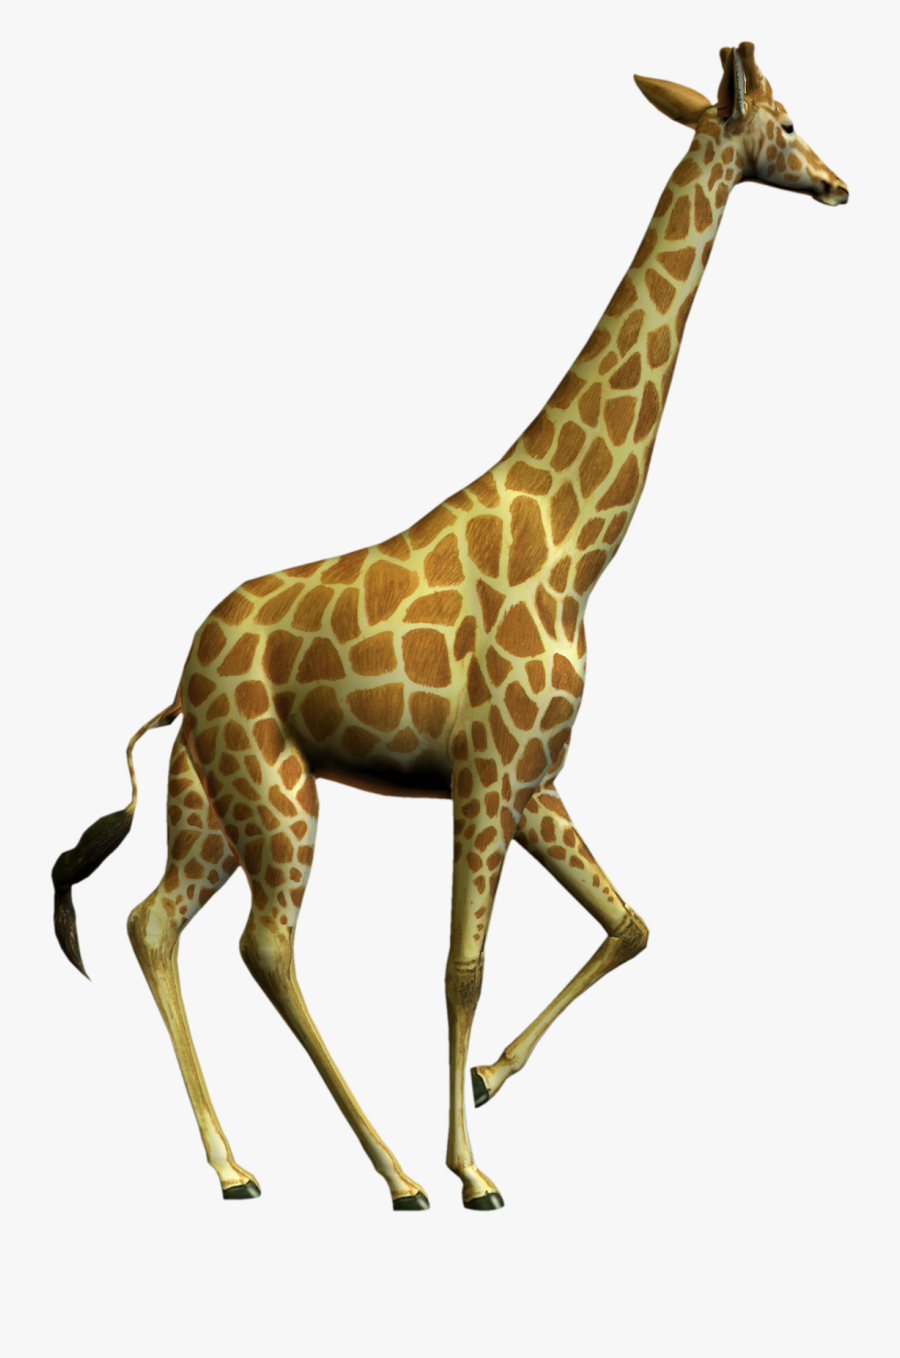 Free High Resolution Graphics And Clip Art - Giraffe Picture High Resolution, Transparent Clipart